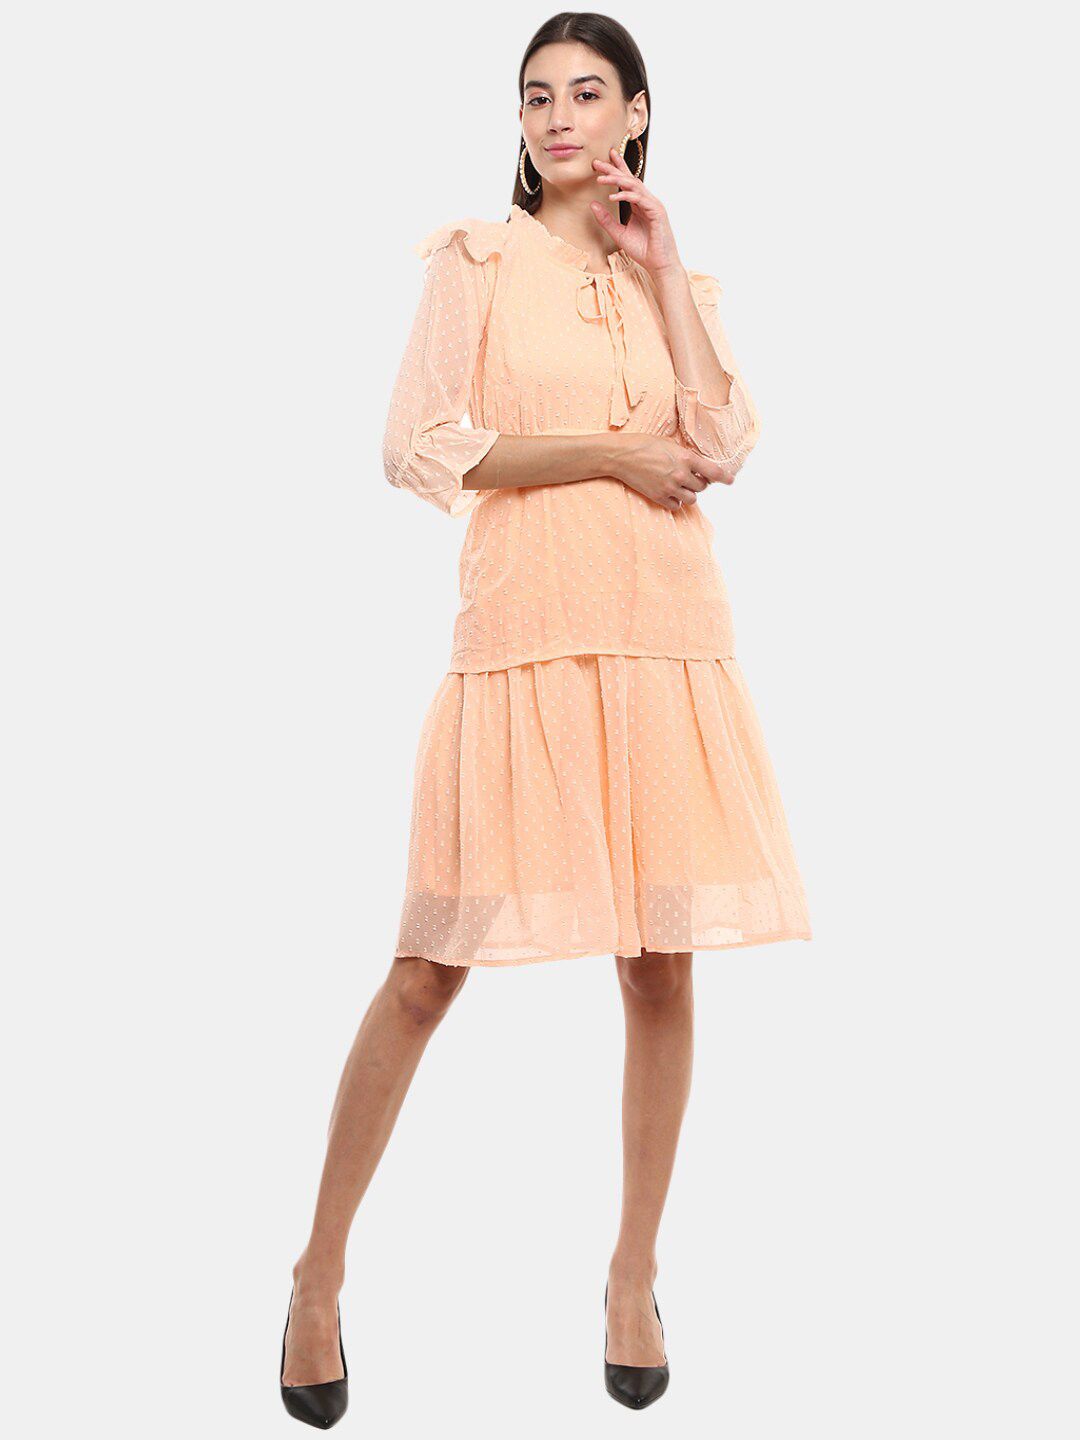 V-Mart Peach-Coloured Tie-Up Neck Satin A-Line Dress Price in India